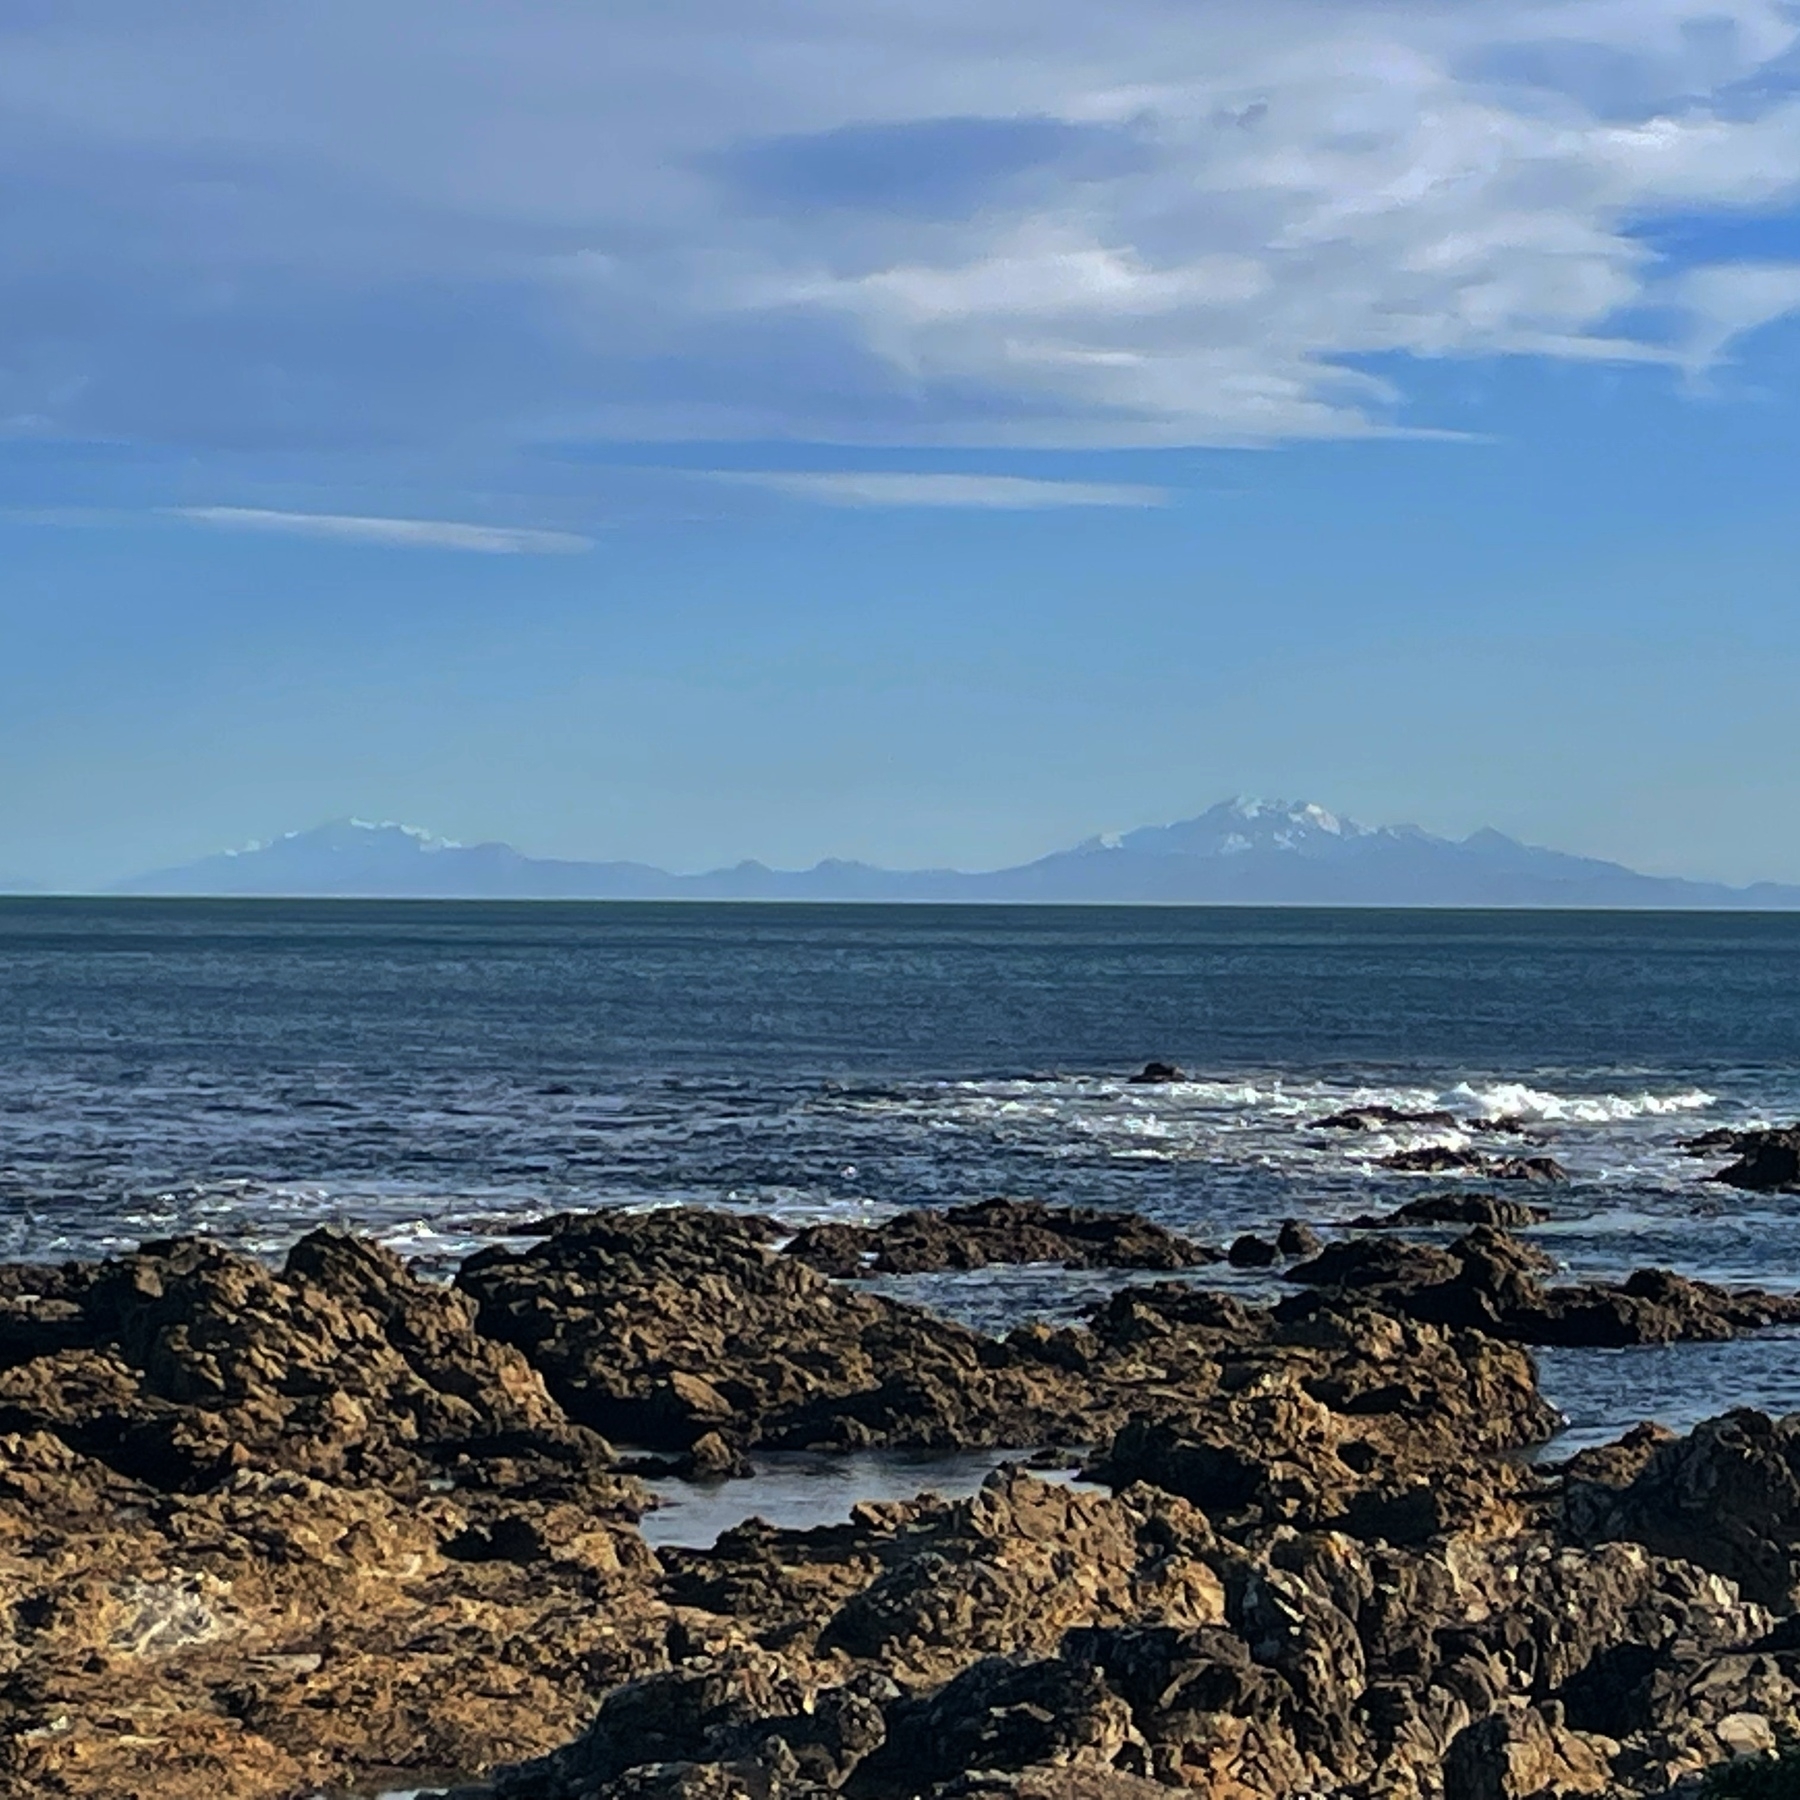 The mountains of the Kaikoura ranges, capped in snow, as seen from the southern Wellington coast